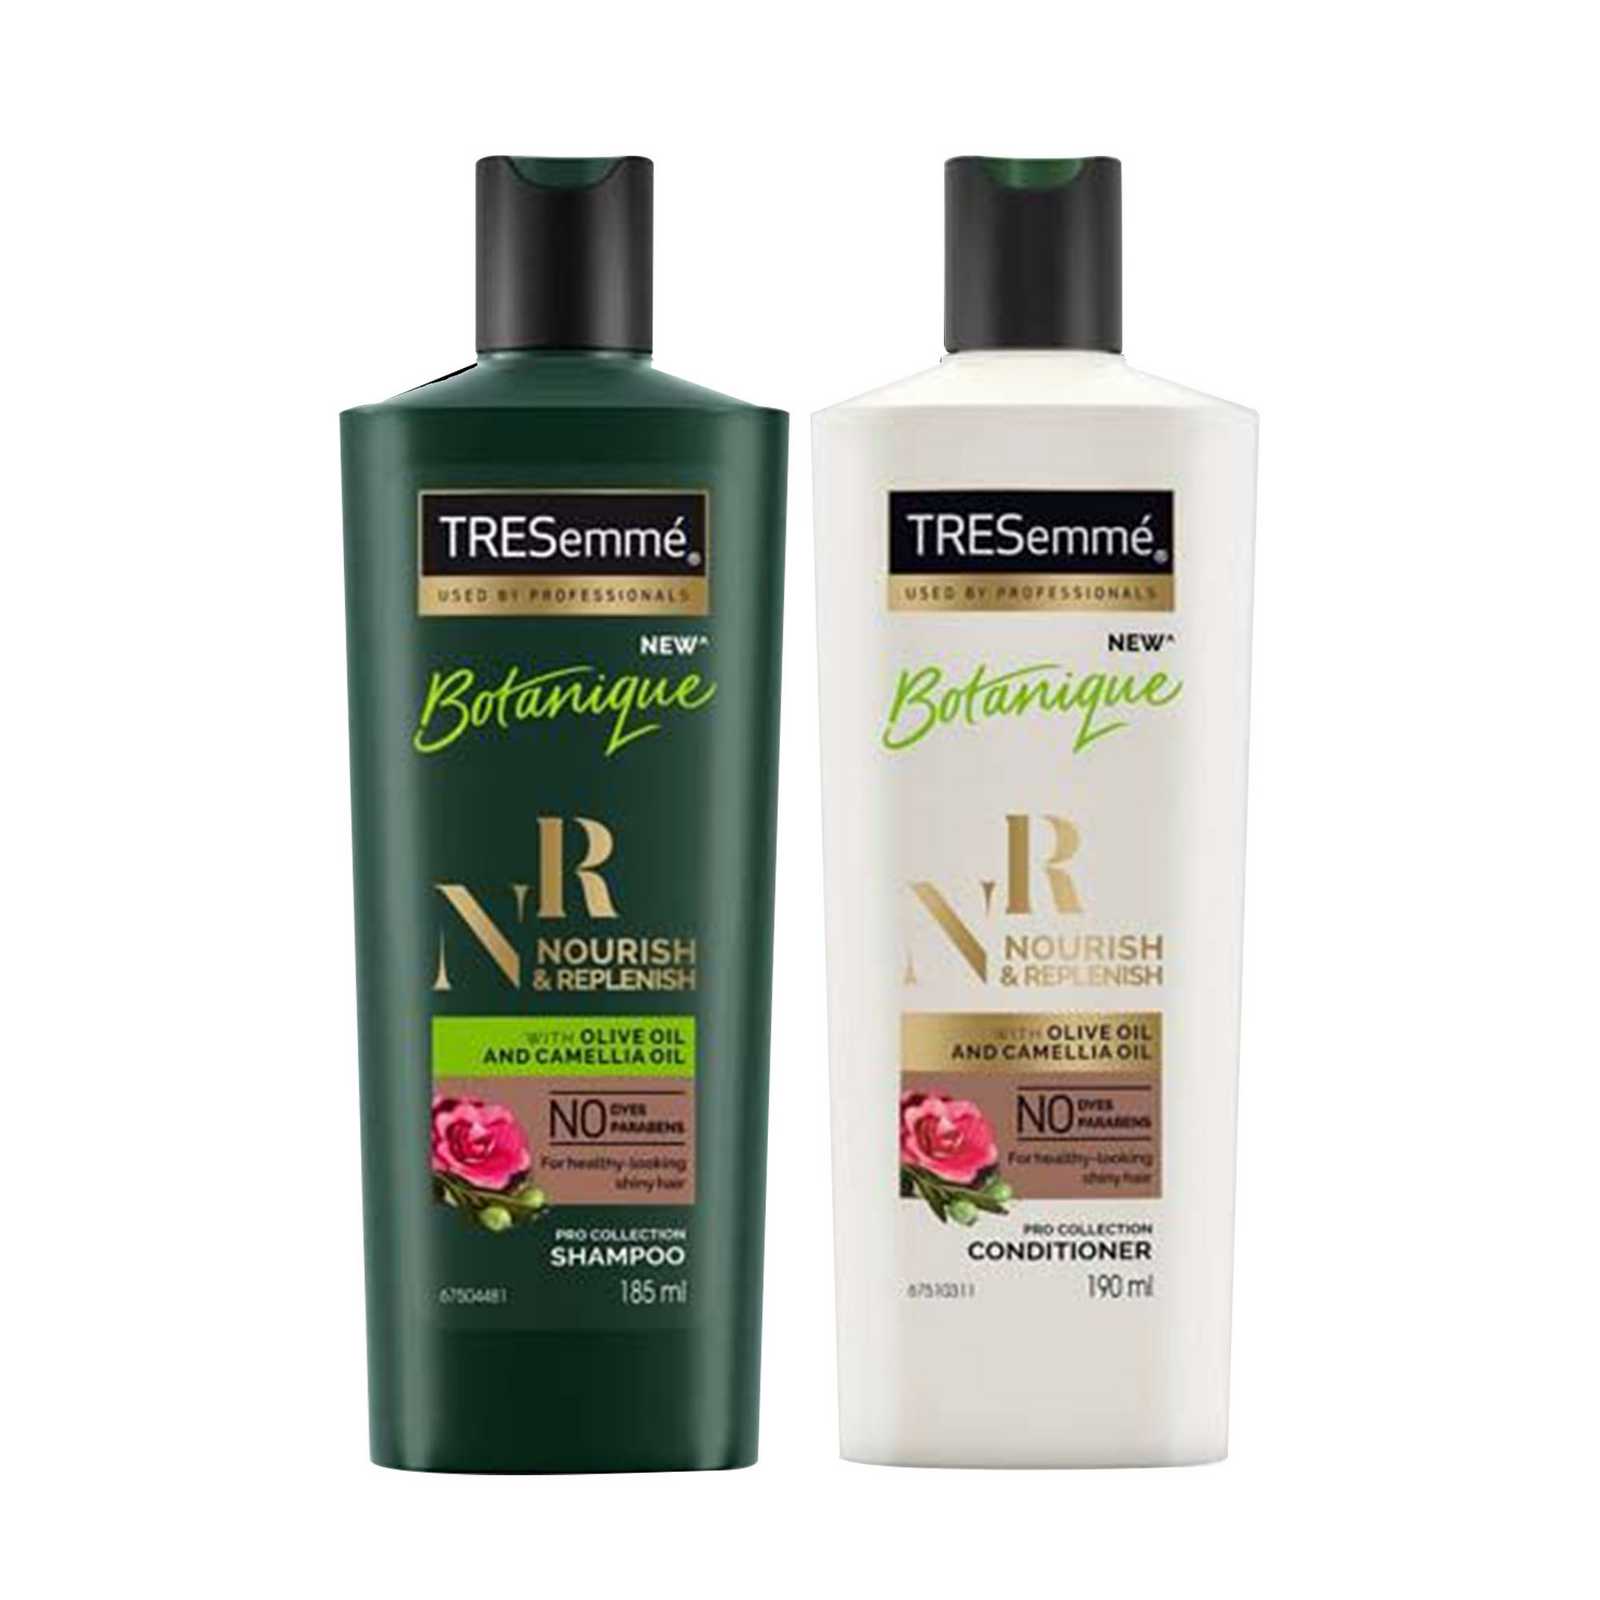 Tresemmé Shampoo Botanique & Replenish Combo Pack - Online Grocery Shopping and Delivery in Bangladesh | Buy fresh items, personal care, baby products and more